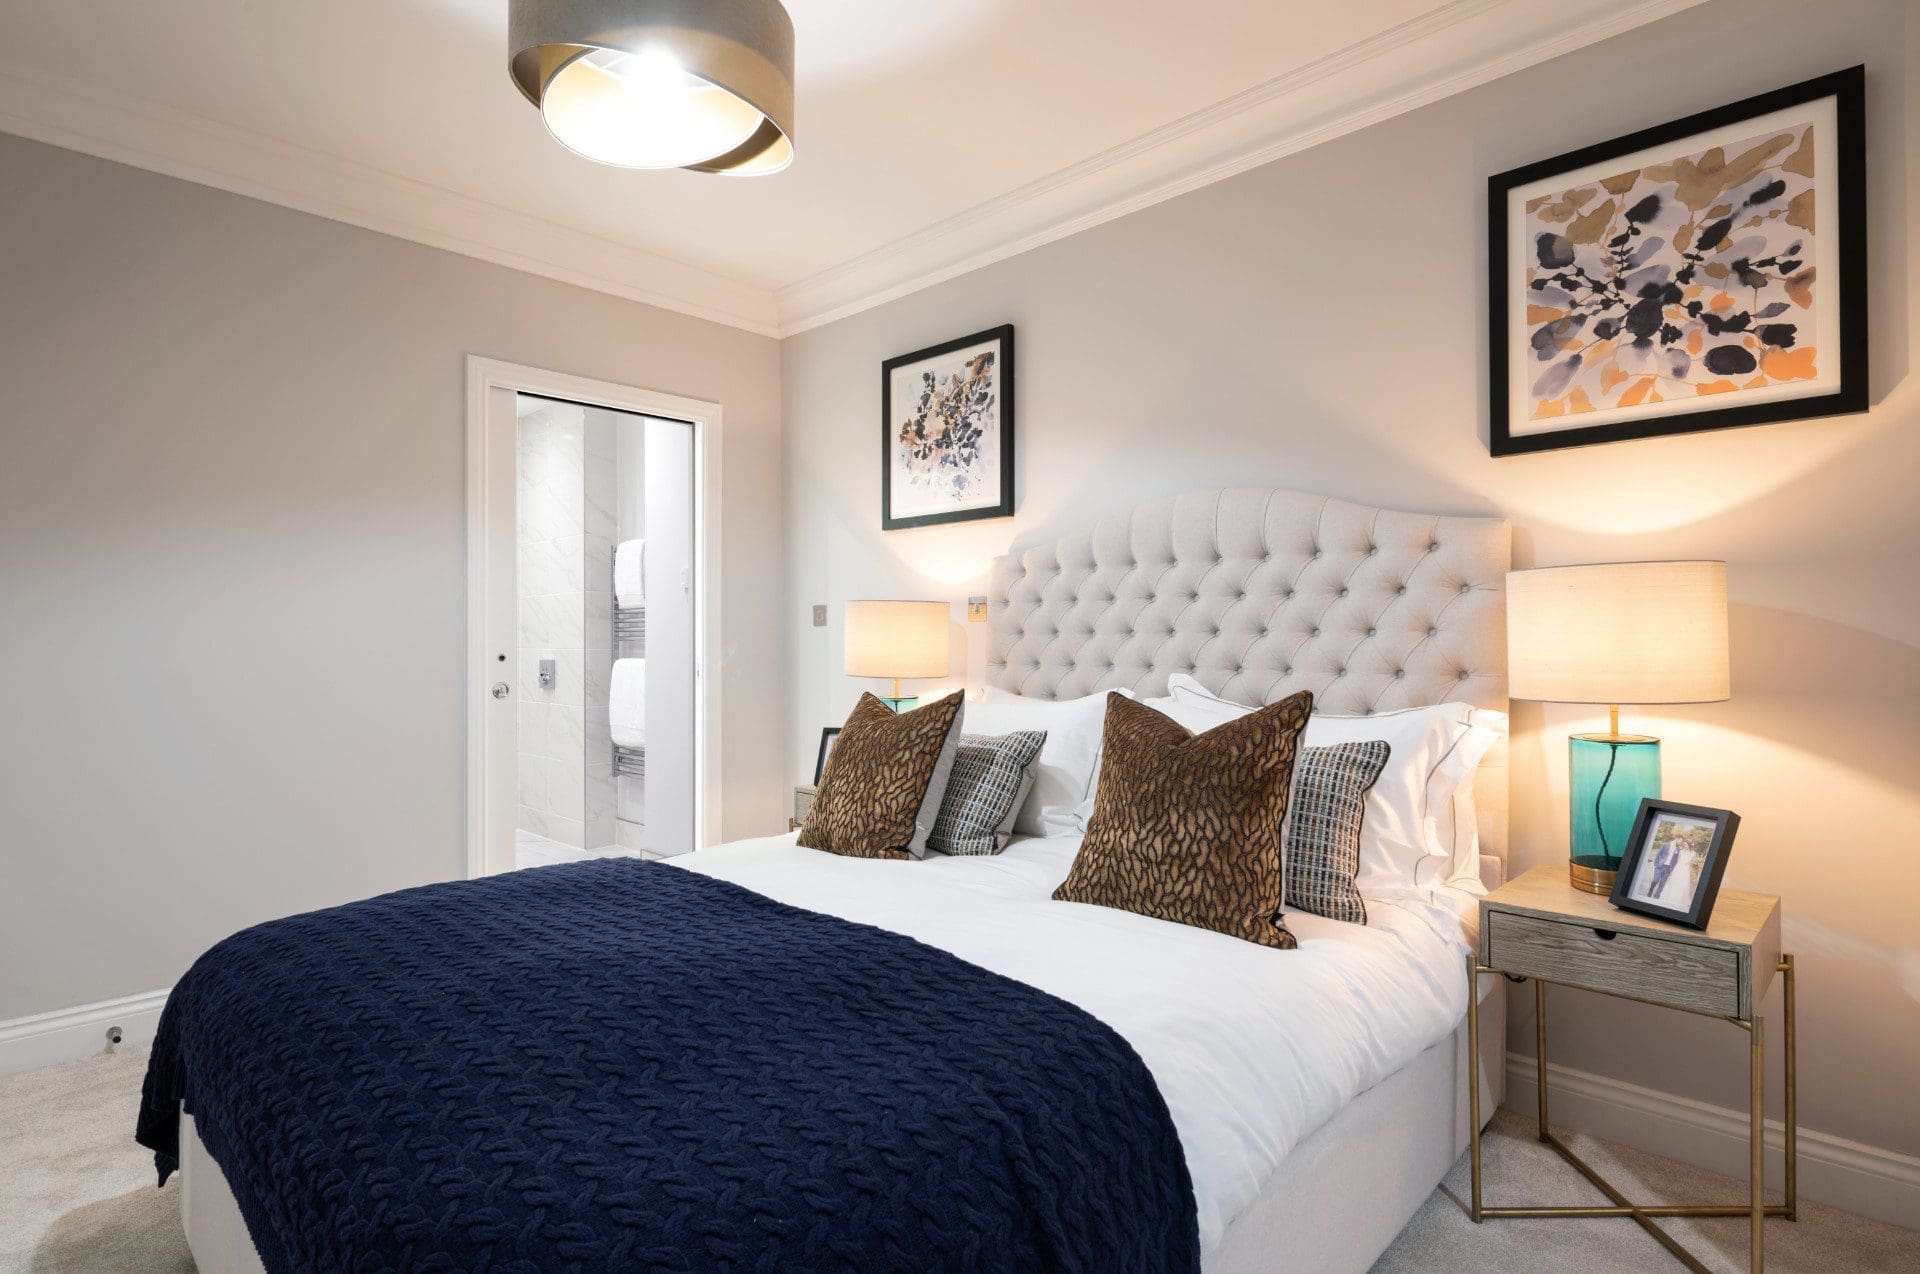 Image of a bedroom at Shenfield Village